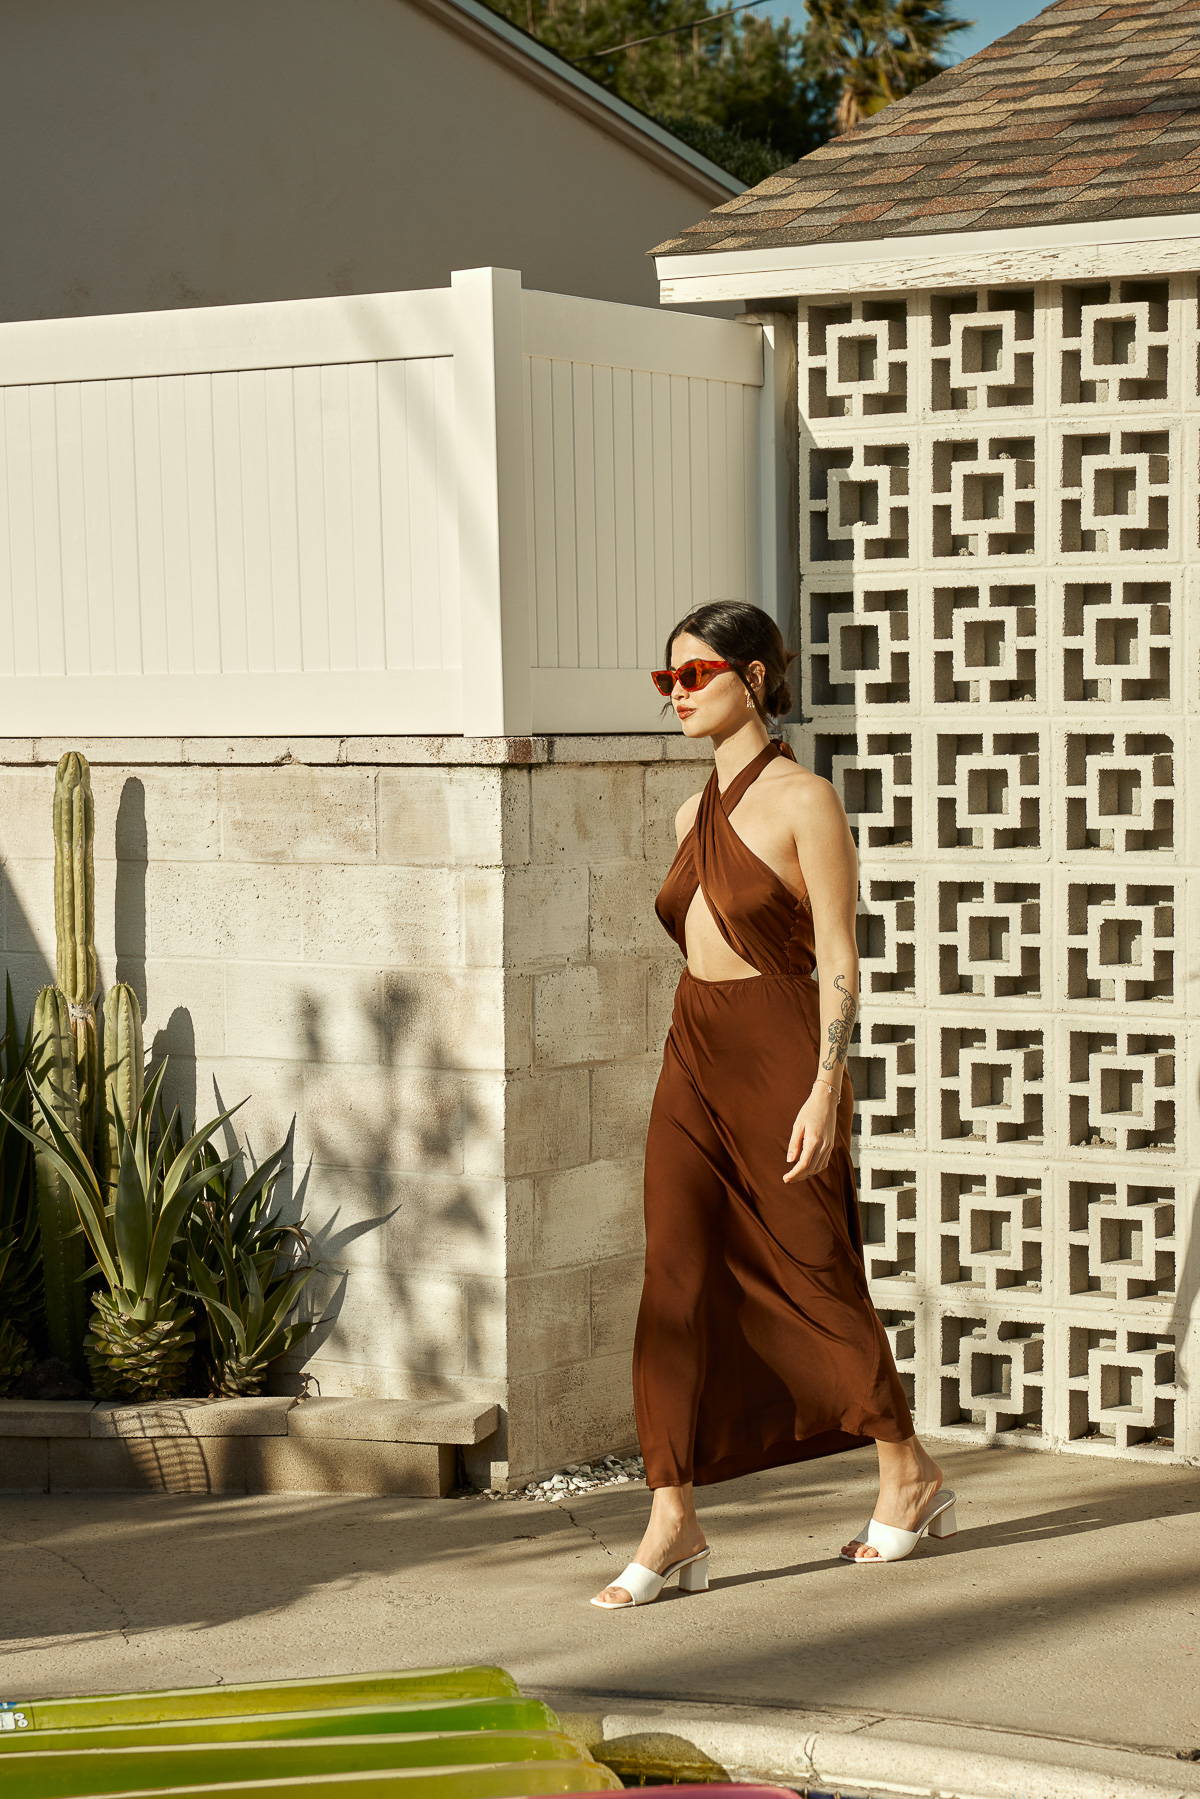 Trixxi Spring summer girl in rust color shiny cut out halter dress by the pool.